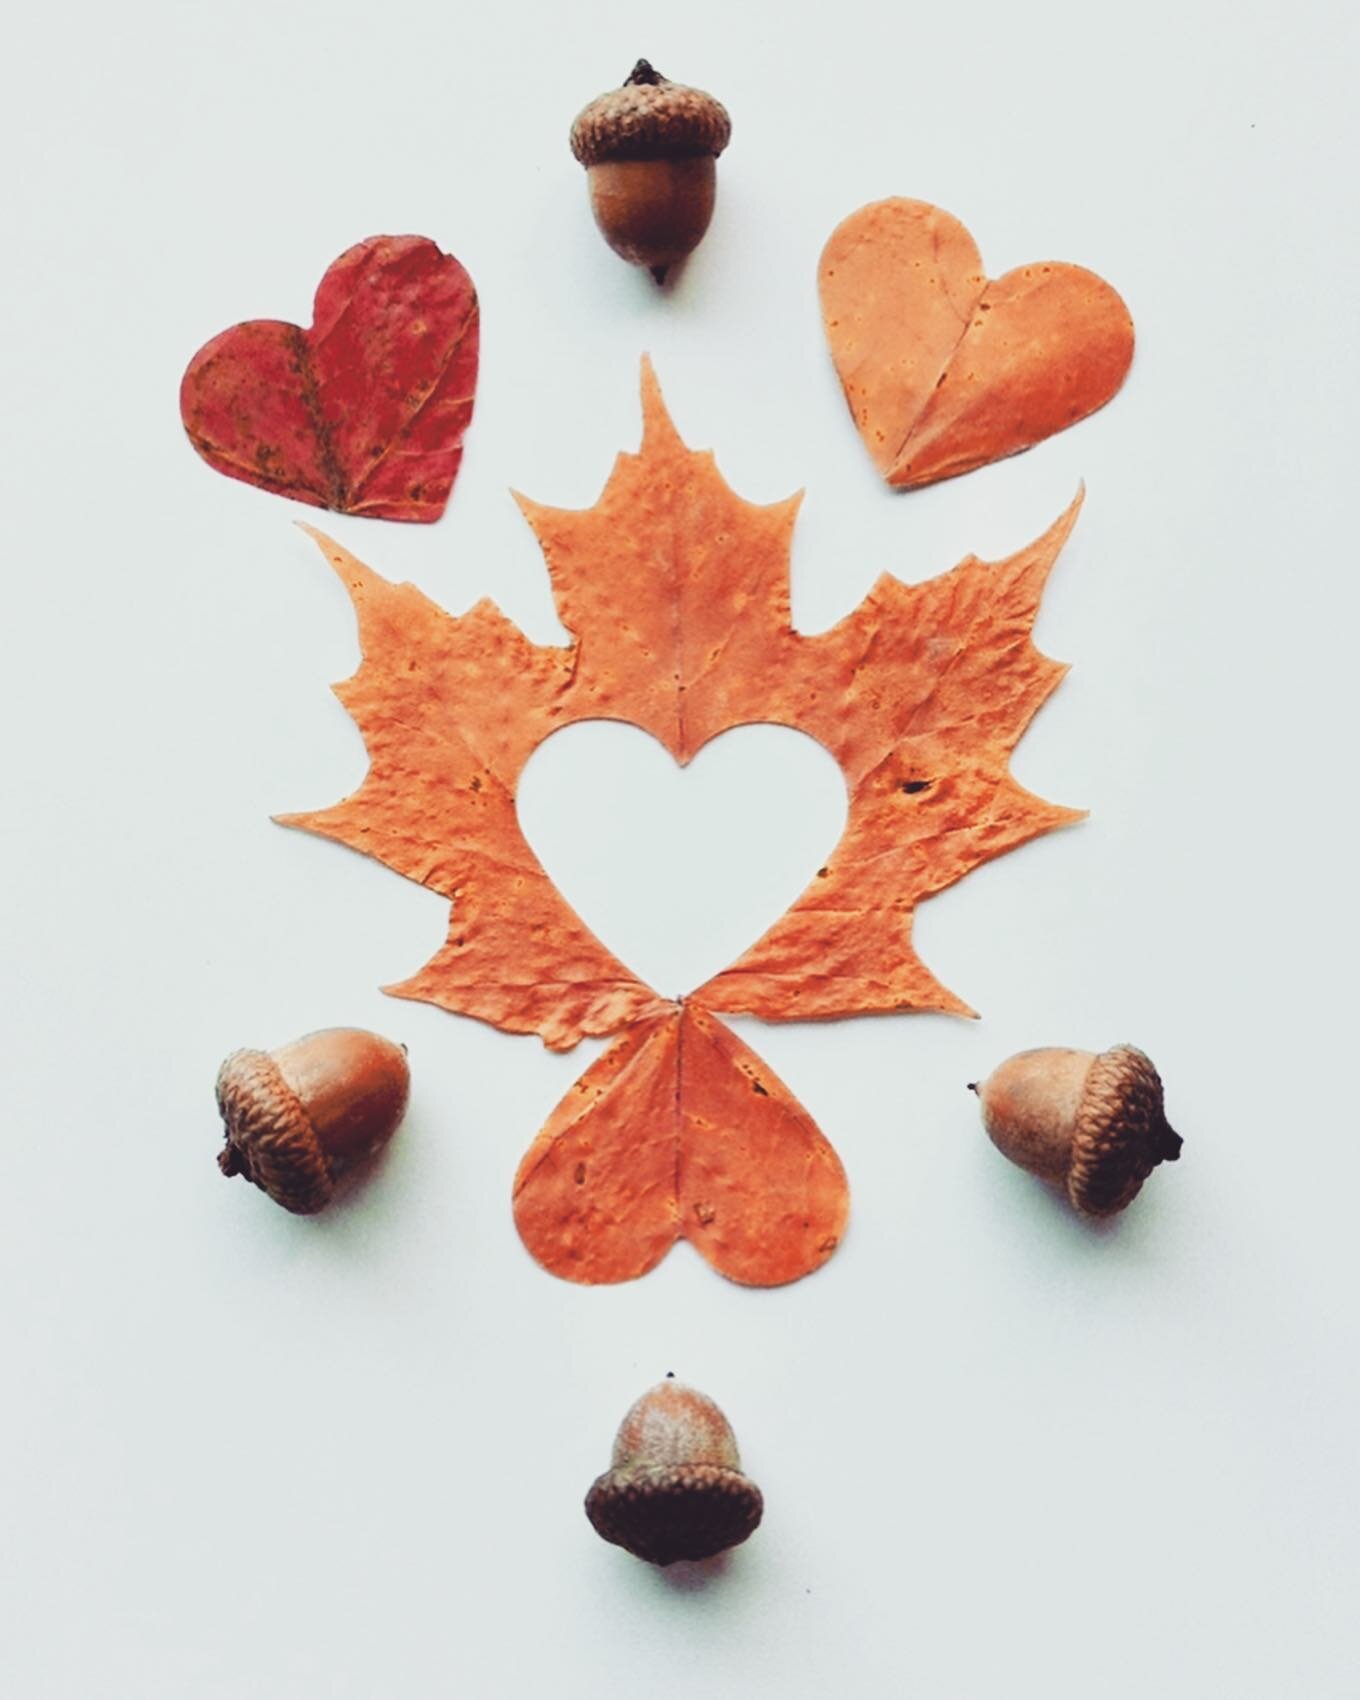 Leaf craft 🍁 🍂 Hope you have a cozy weekend friends!